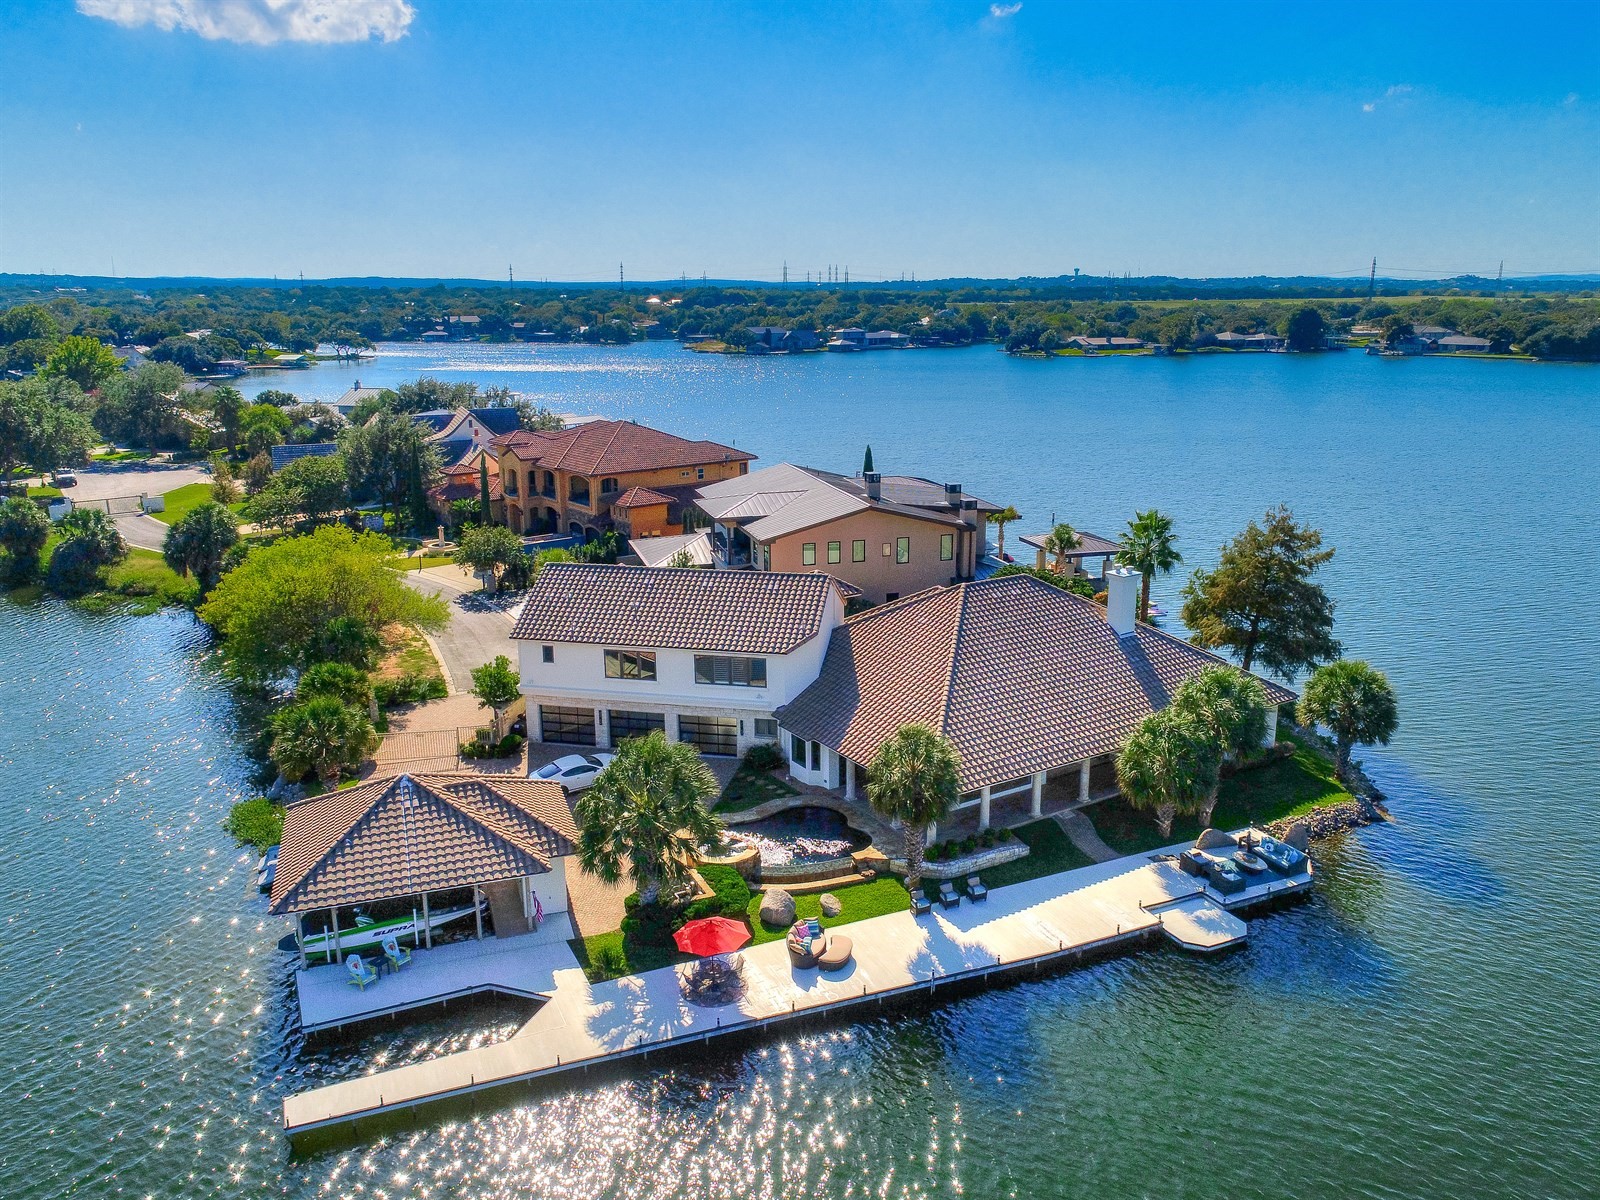 The Highland Lakes has a variety of waterfront property with a range of amenities. Current listings start at a low of about $160,000 on Lake Buchanan and top out at $6 million on Lake LBJ. The Lake LBJ home pictured here is one recently sold by Tammie Bennett, who shared insight into the waterfront property market of the Highland Lakes. Photo courtesy Tammie Bennett